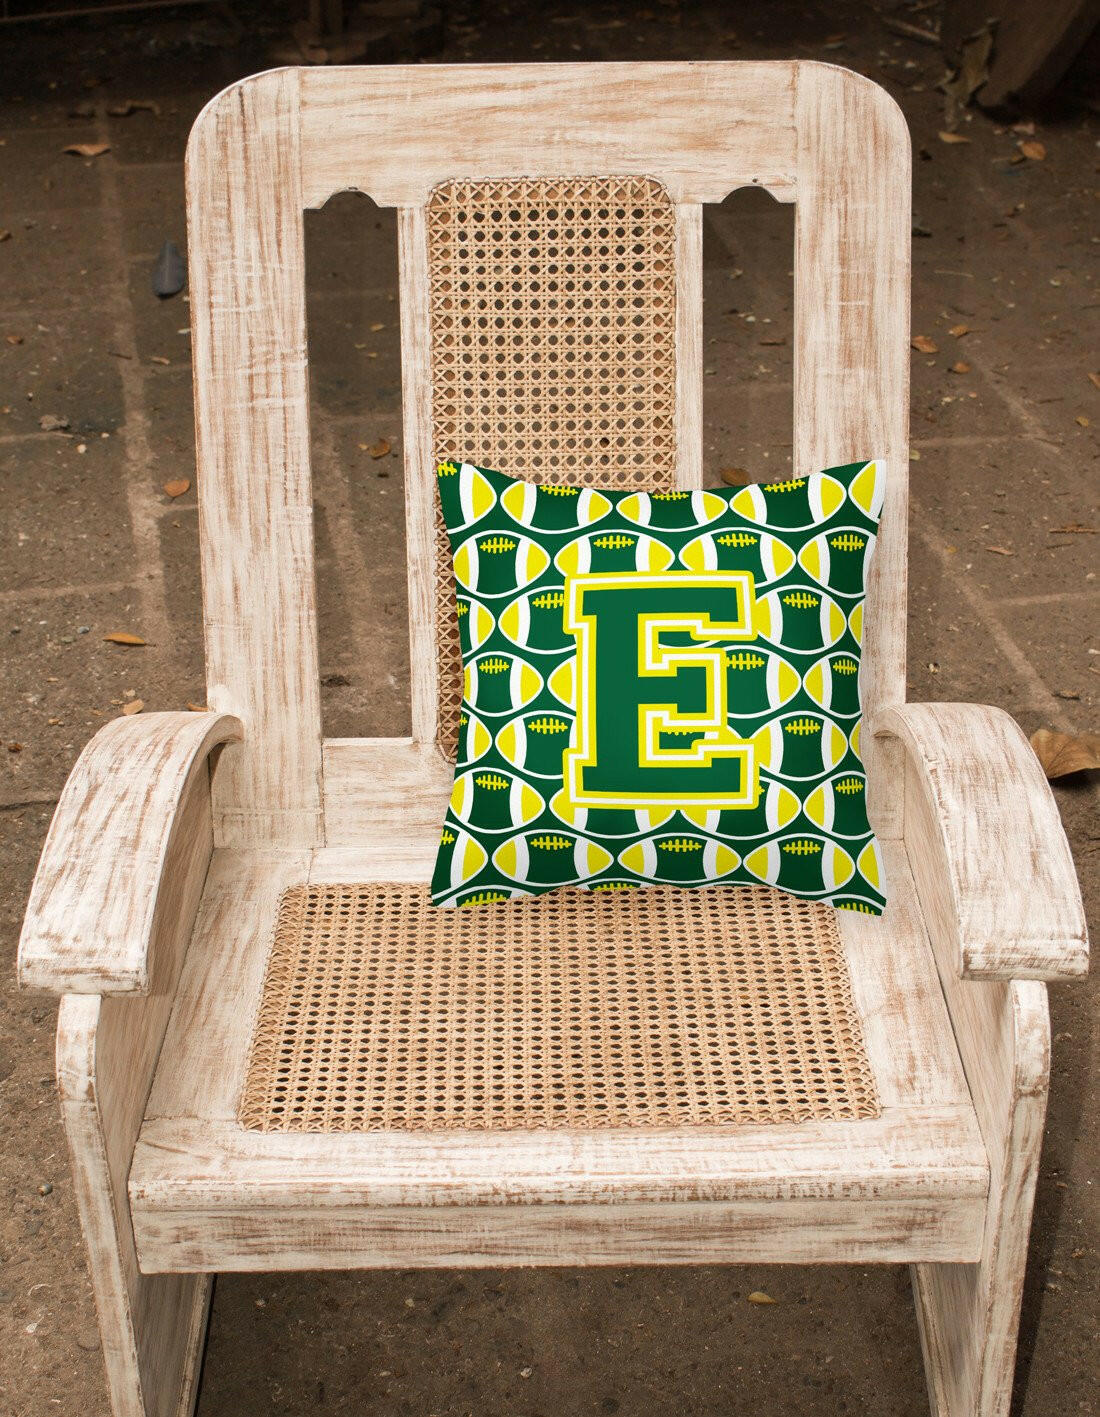 Letter E Football Green and Yellow Fabric Decorative Pillow CJ1075-EPW1414 by Caroline's Treasures